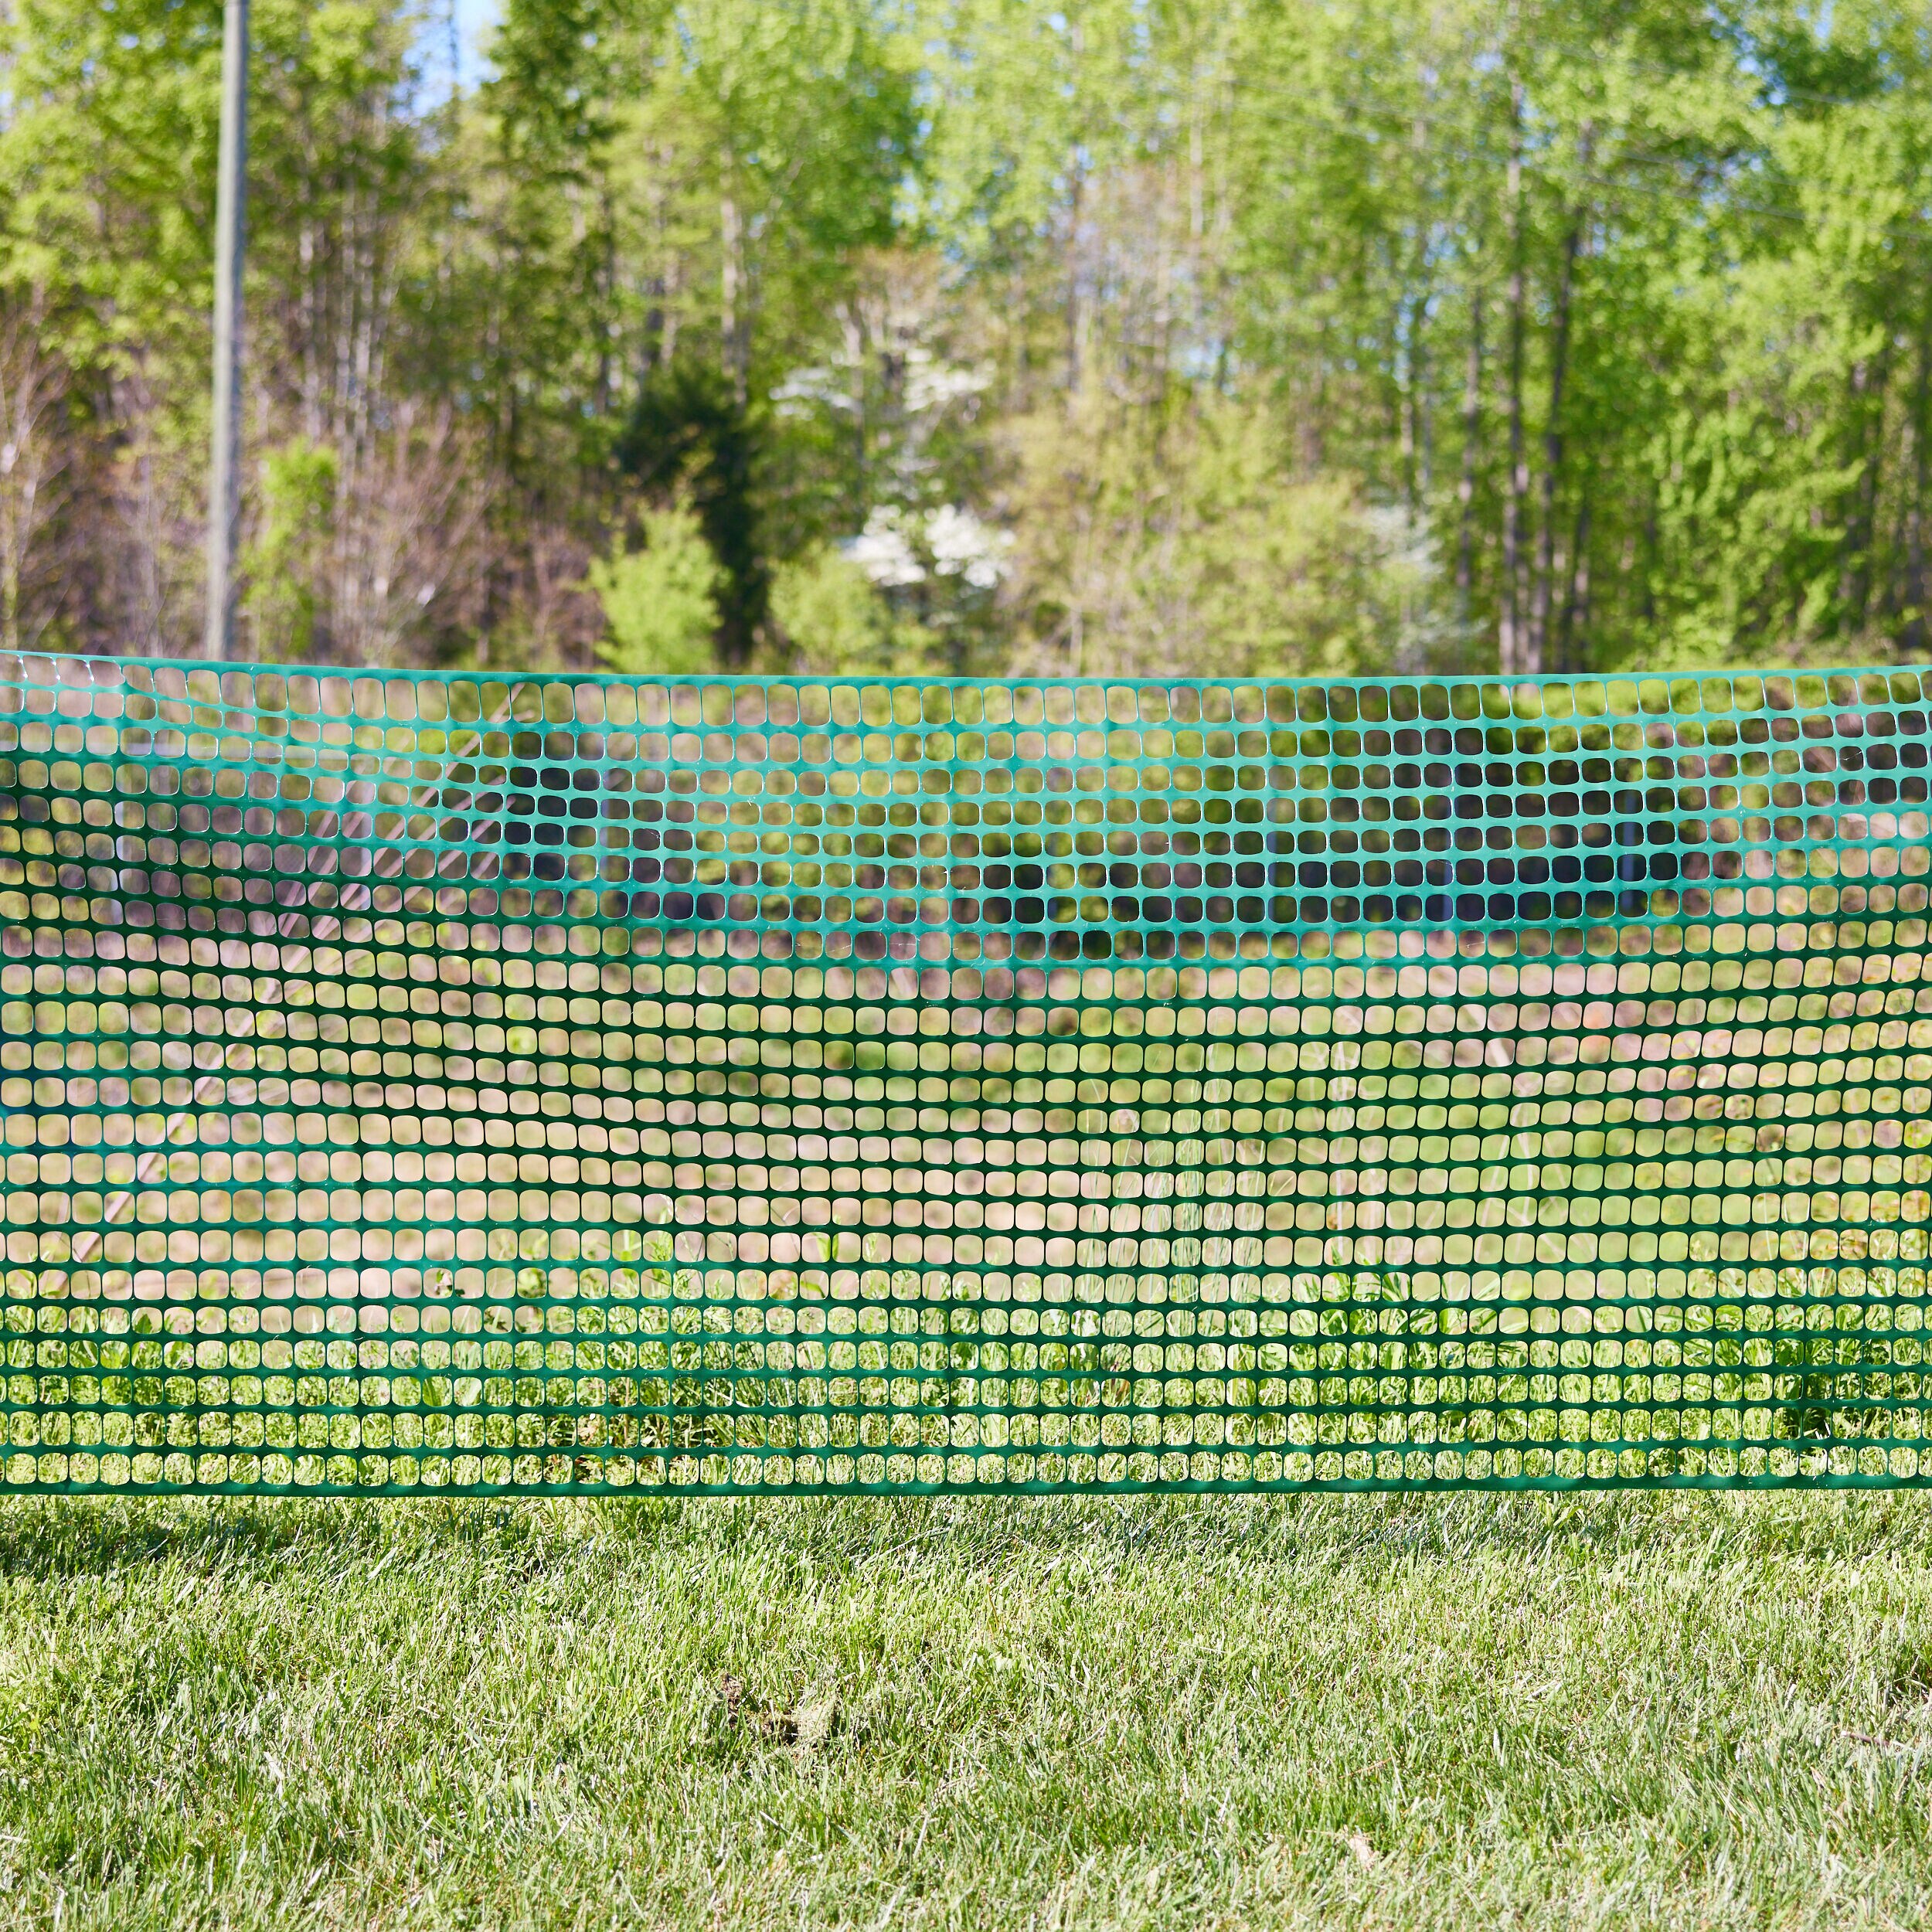 Plastic Safety Fence, Snow Fence, Construction Fence in Stock - ULINE